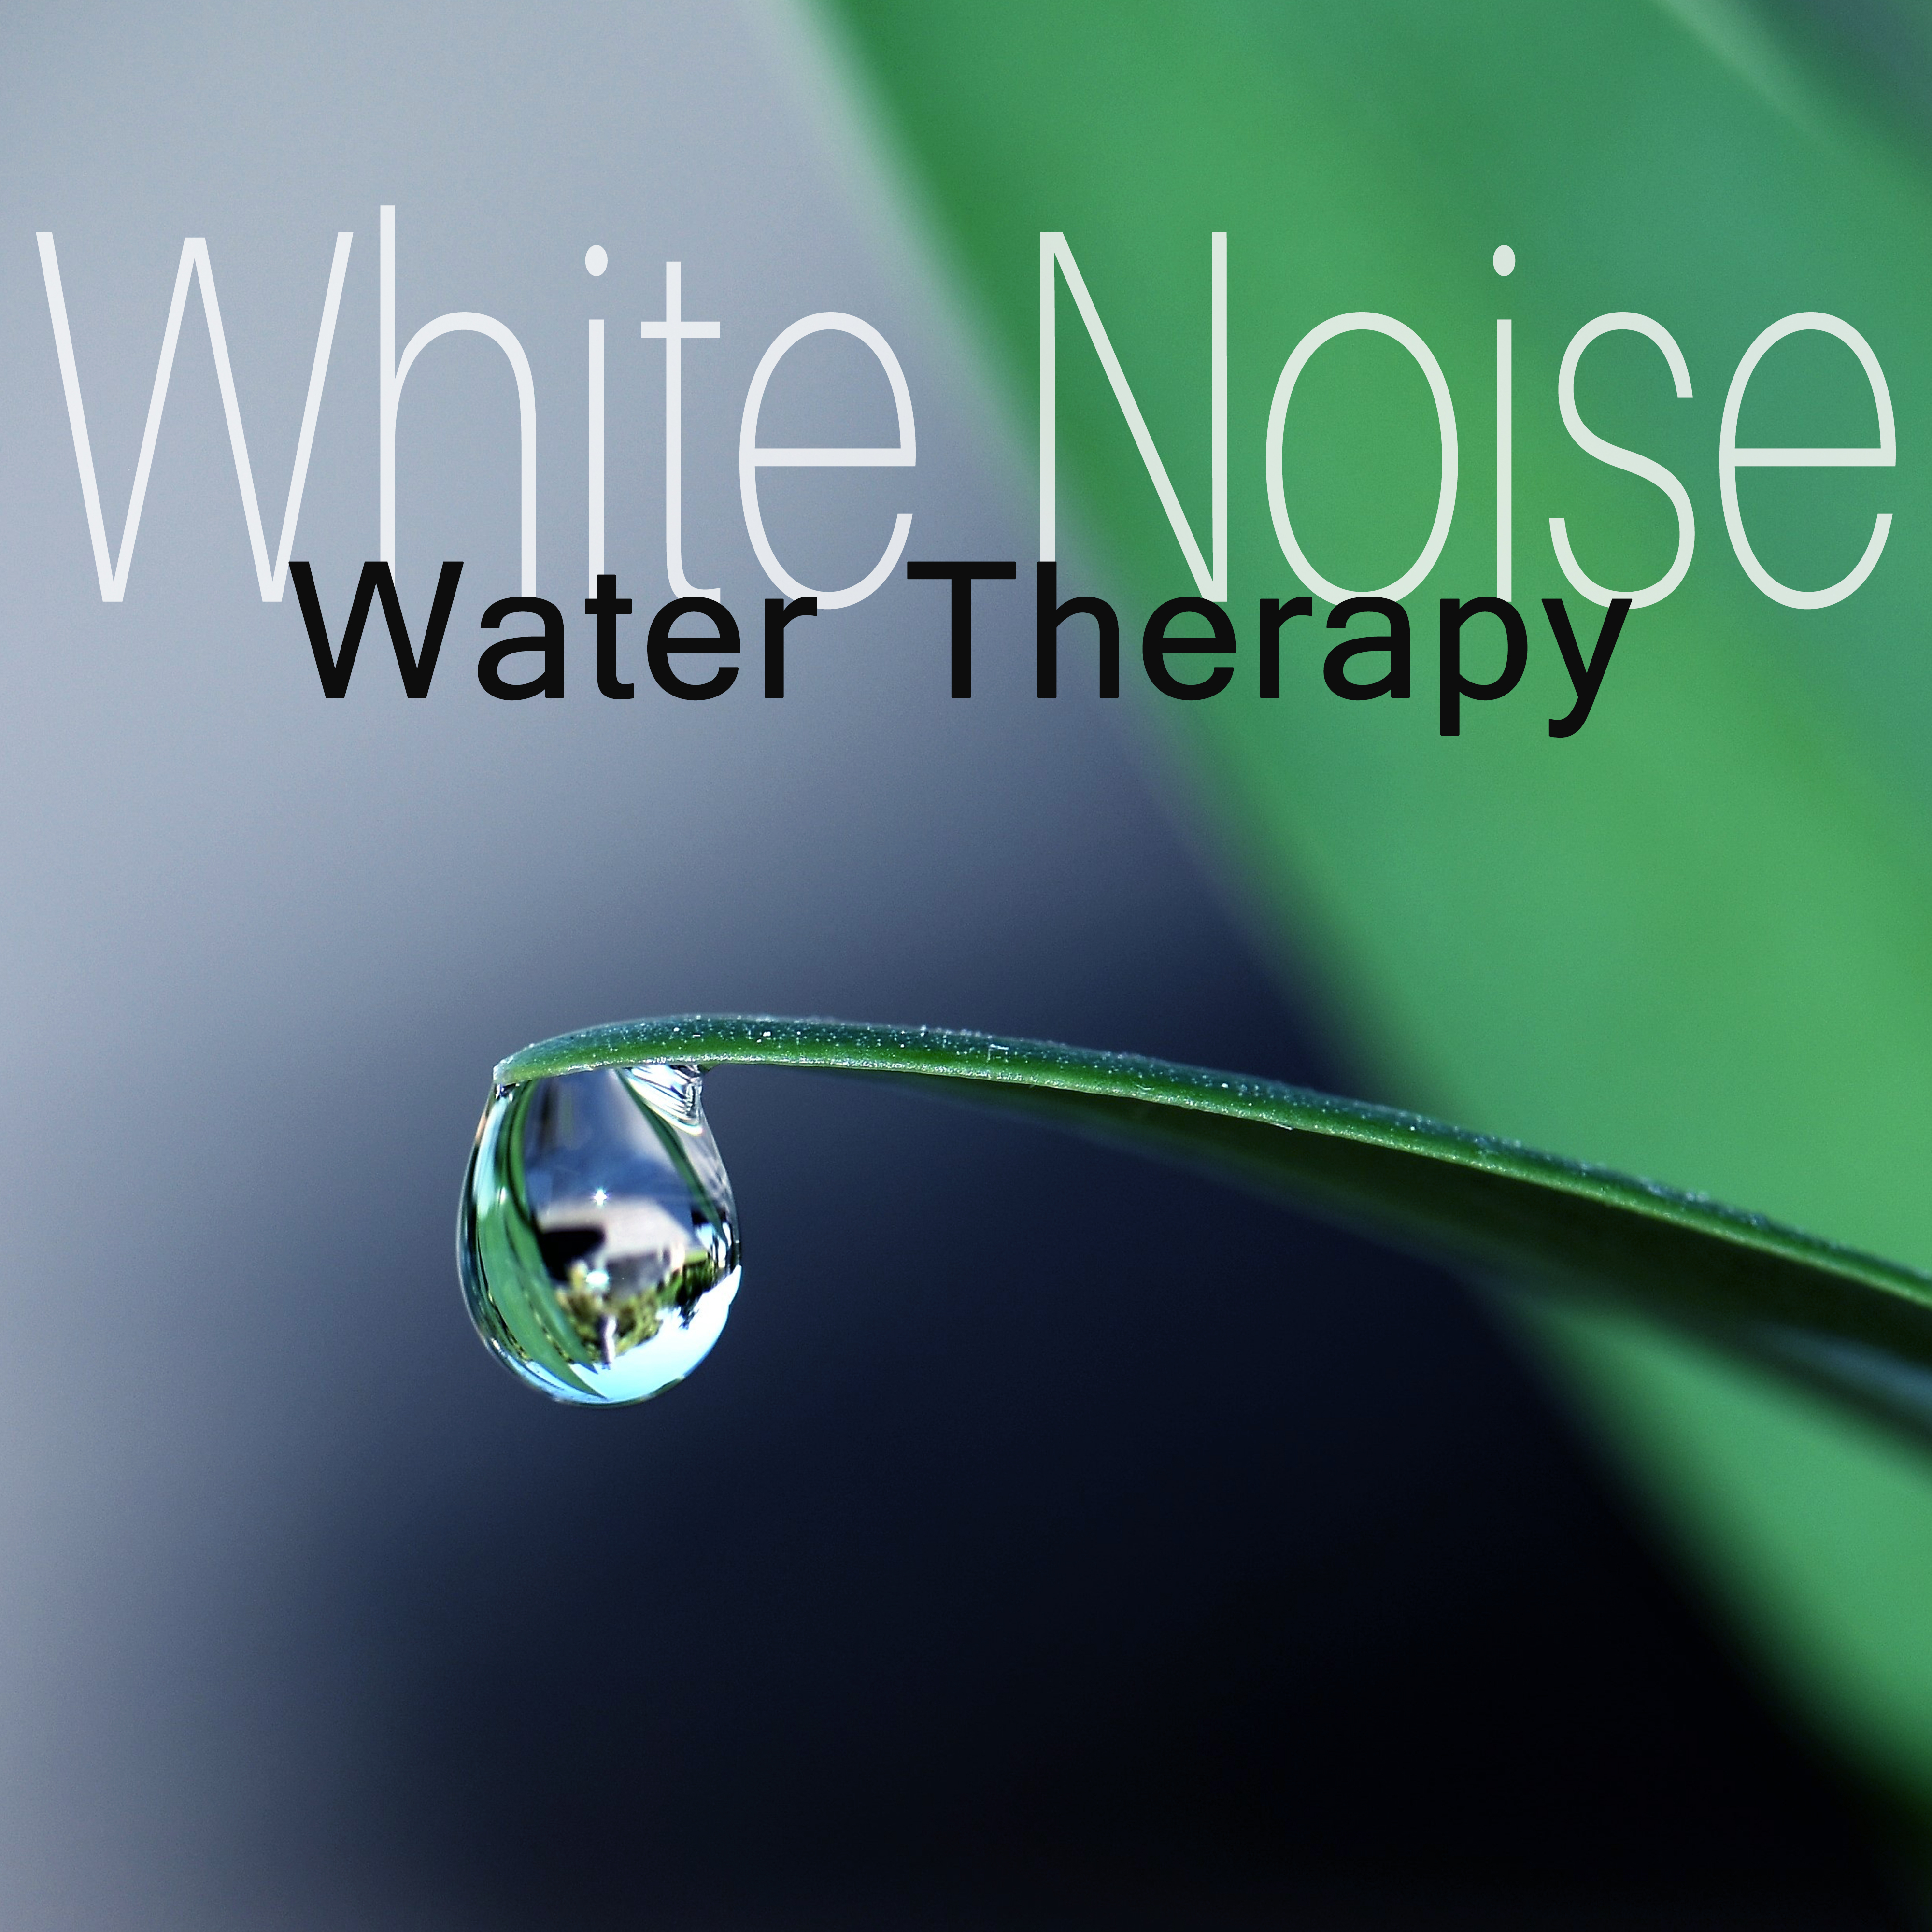 White Noise Water Therapy  Nature Sounds, White Noise Therapy, Music for Sleep, Rest, Relief Stress